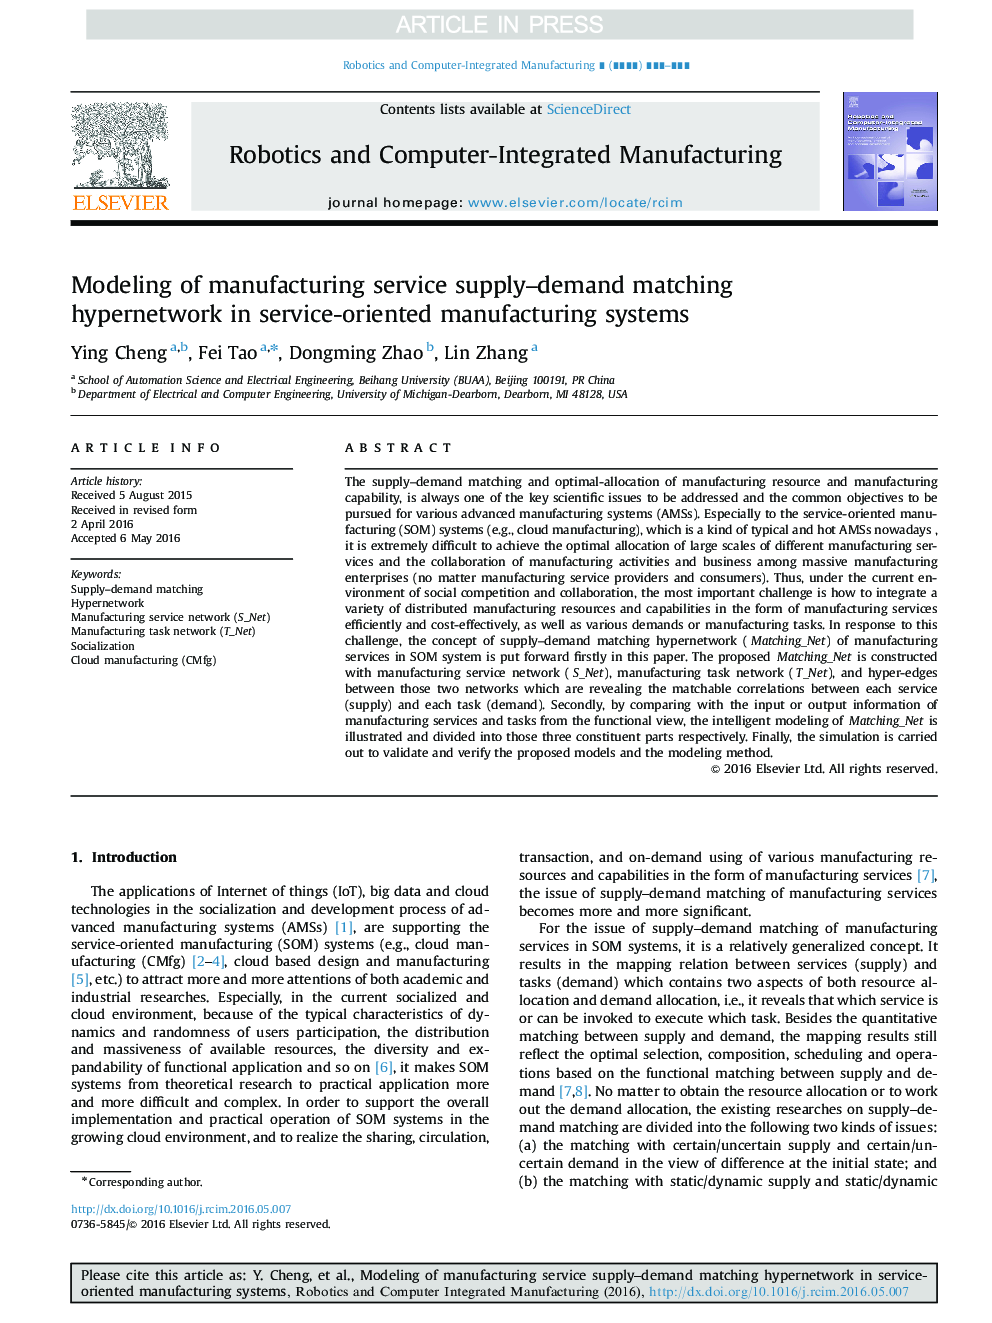 Modeling of manufacturing service supply-demand matching hypernetwork in service-oriented manufacturing systems